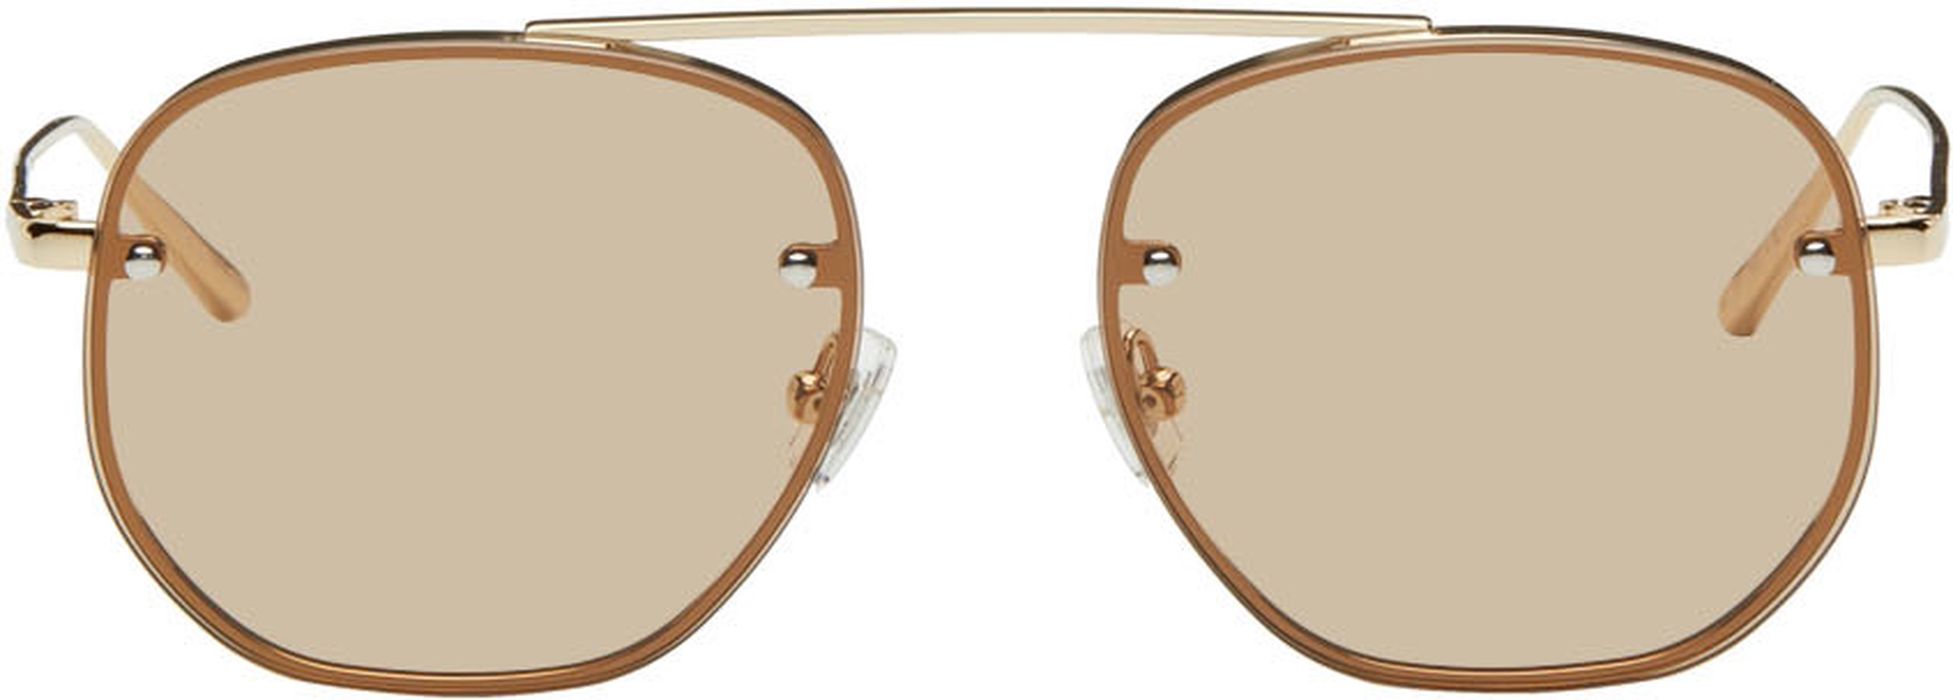 BONNIE CLYDE Gold Traction Sunglasses